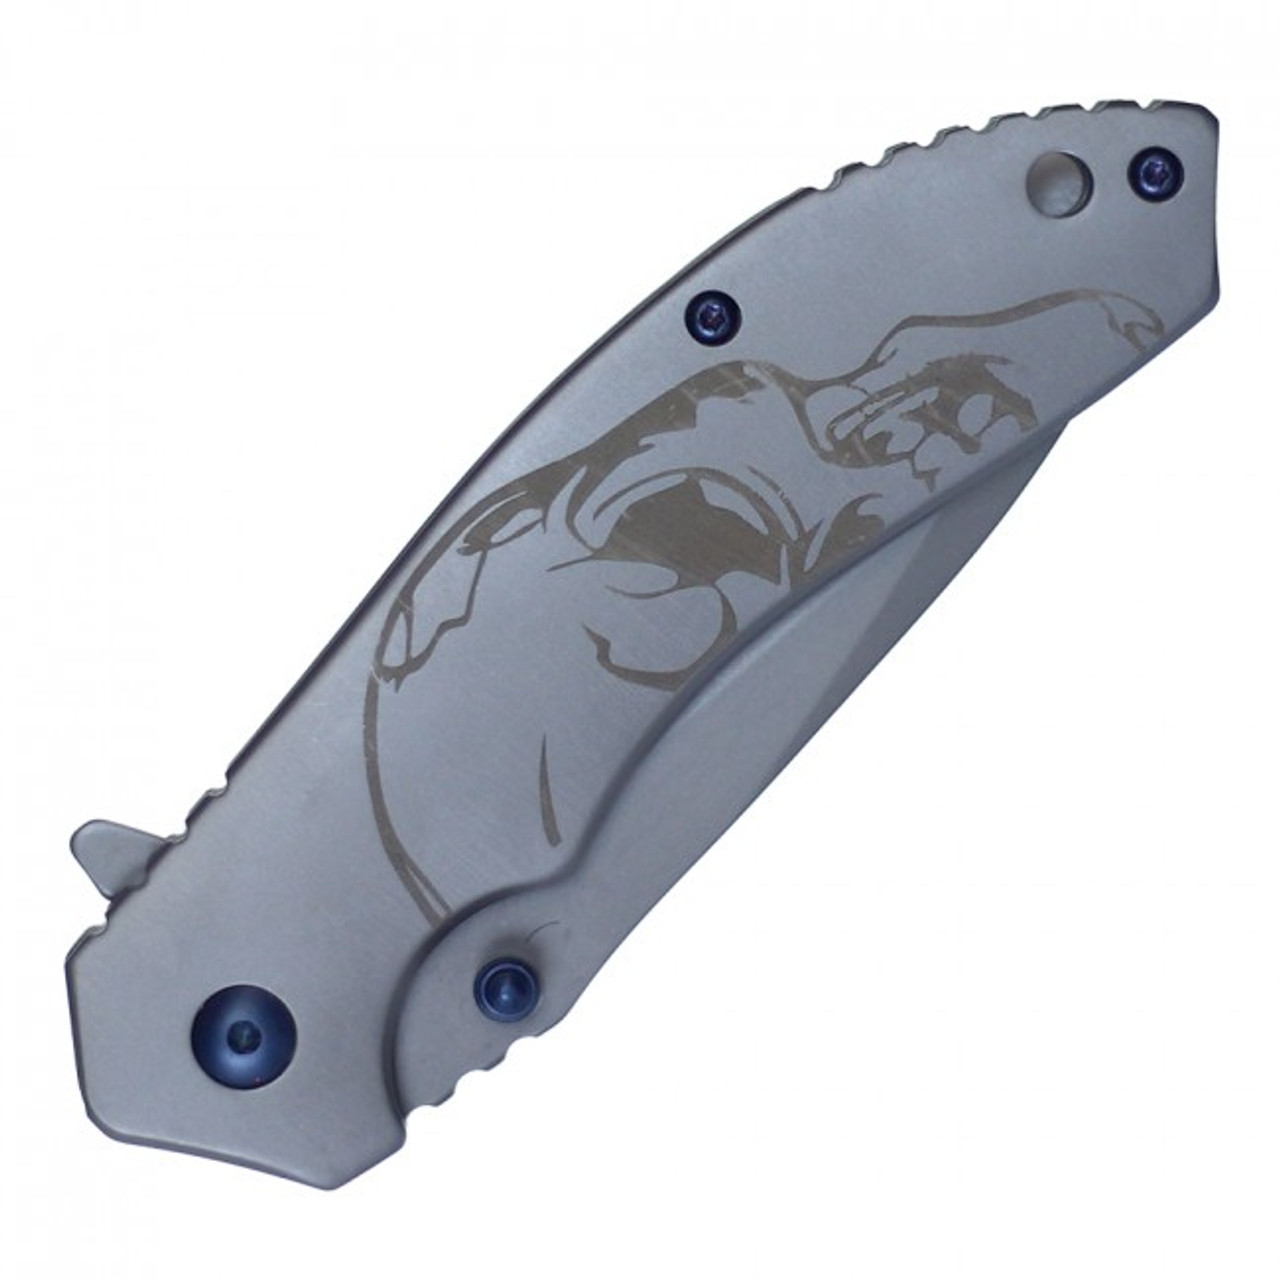 7 3/4" Assisted Open Ball Bearing Pocket Knife - PBB3GY